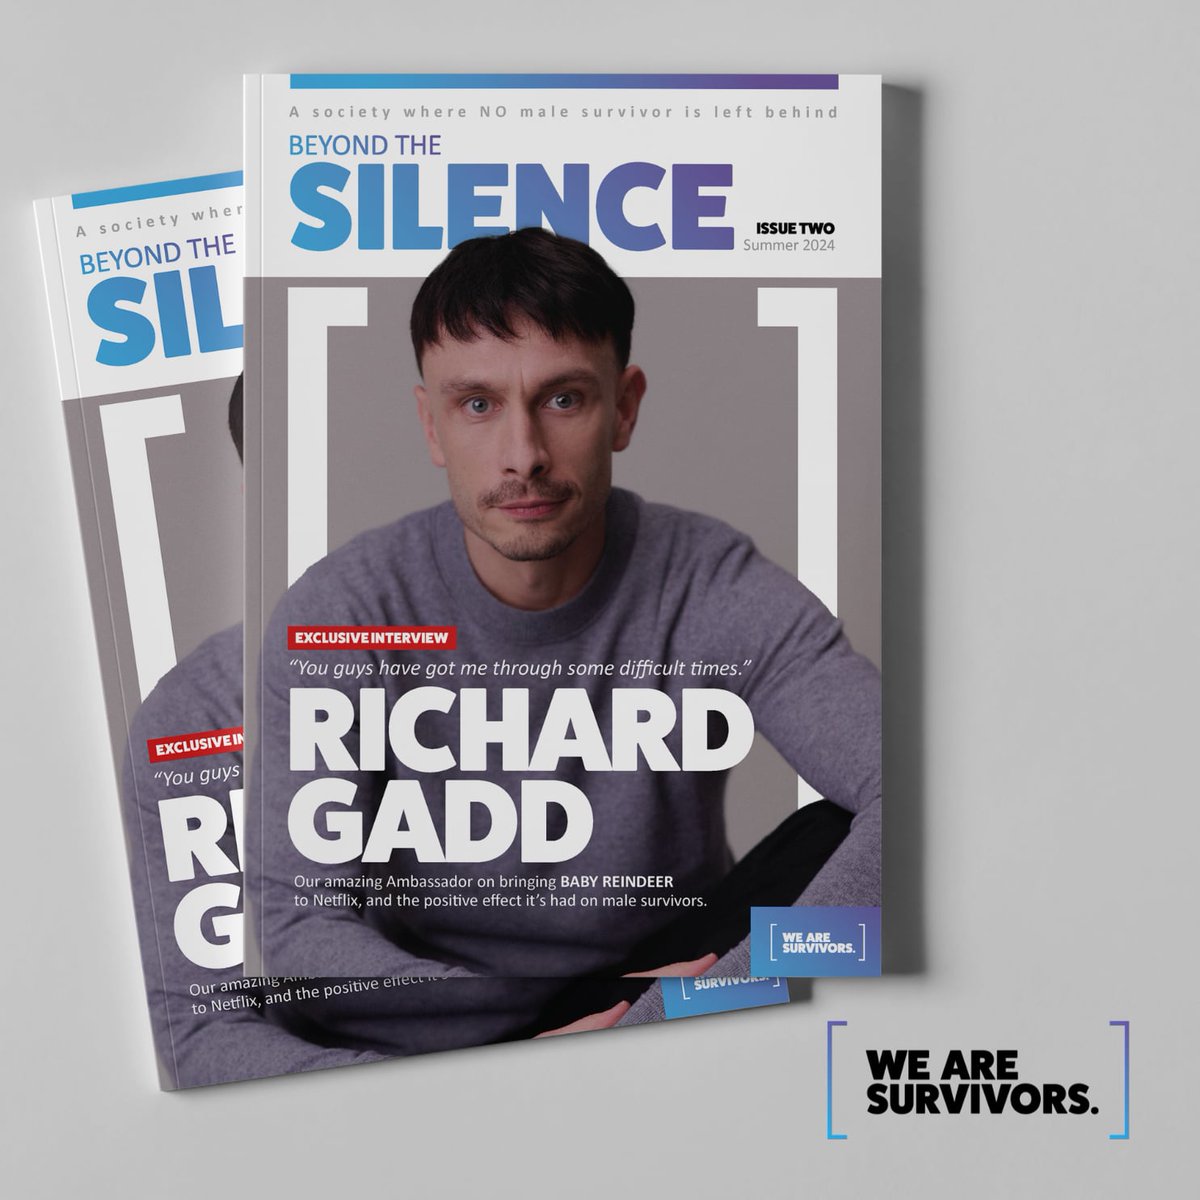 We're that close to pressing PRINT on our brand new edition of BEYOND THE SILENCE that we now have preview of the front cover as a teaser! If you want a copy of this quarterly magazine, then sign up here: wearesurvivors.org.uk/breakthesilence #MaleSurvivors #HeToo #HealingJourney #Charity